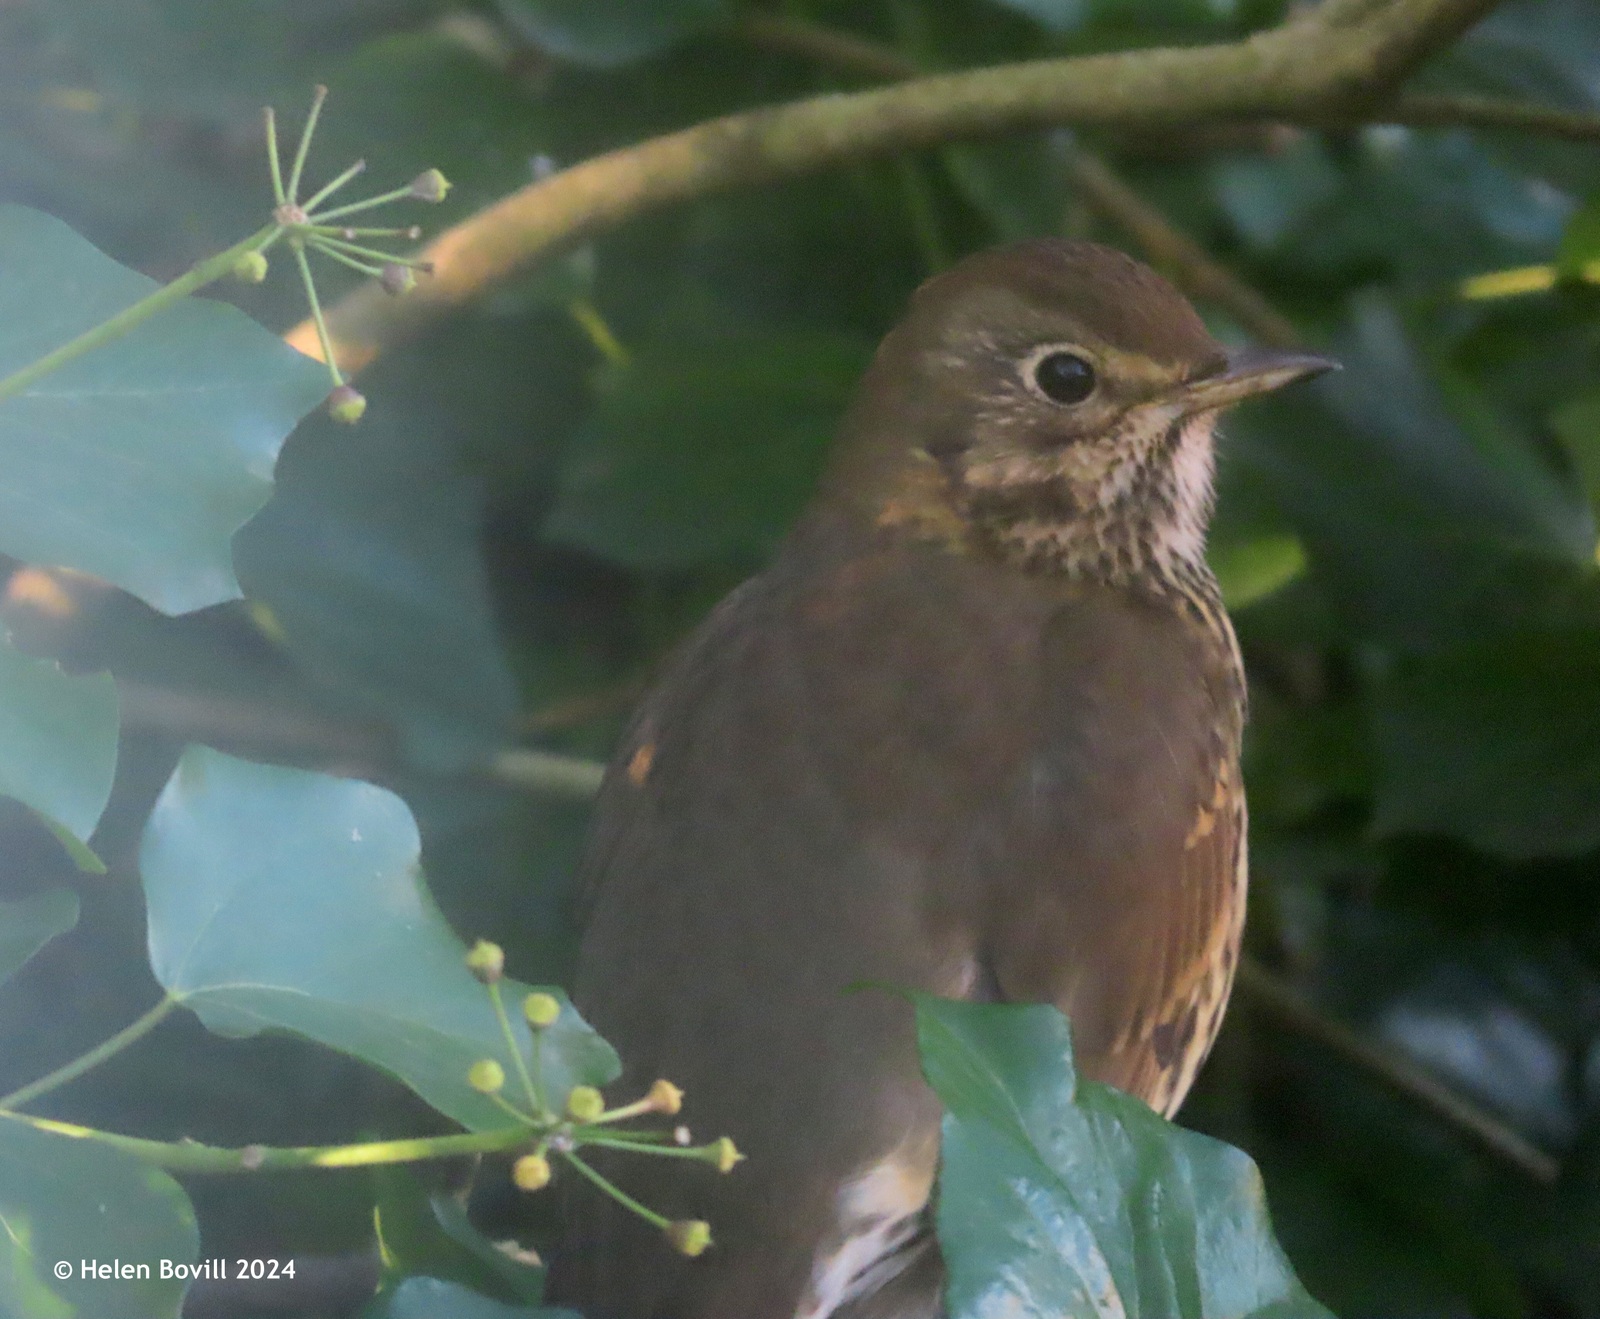 The back view of a Song Thrush perched amongst some ivy